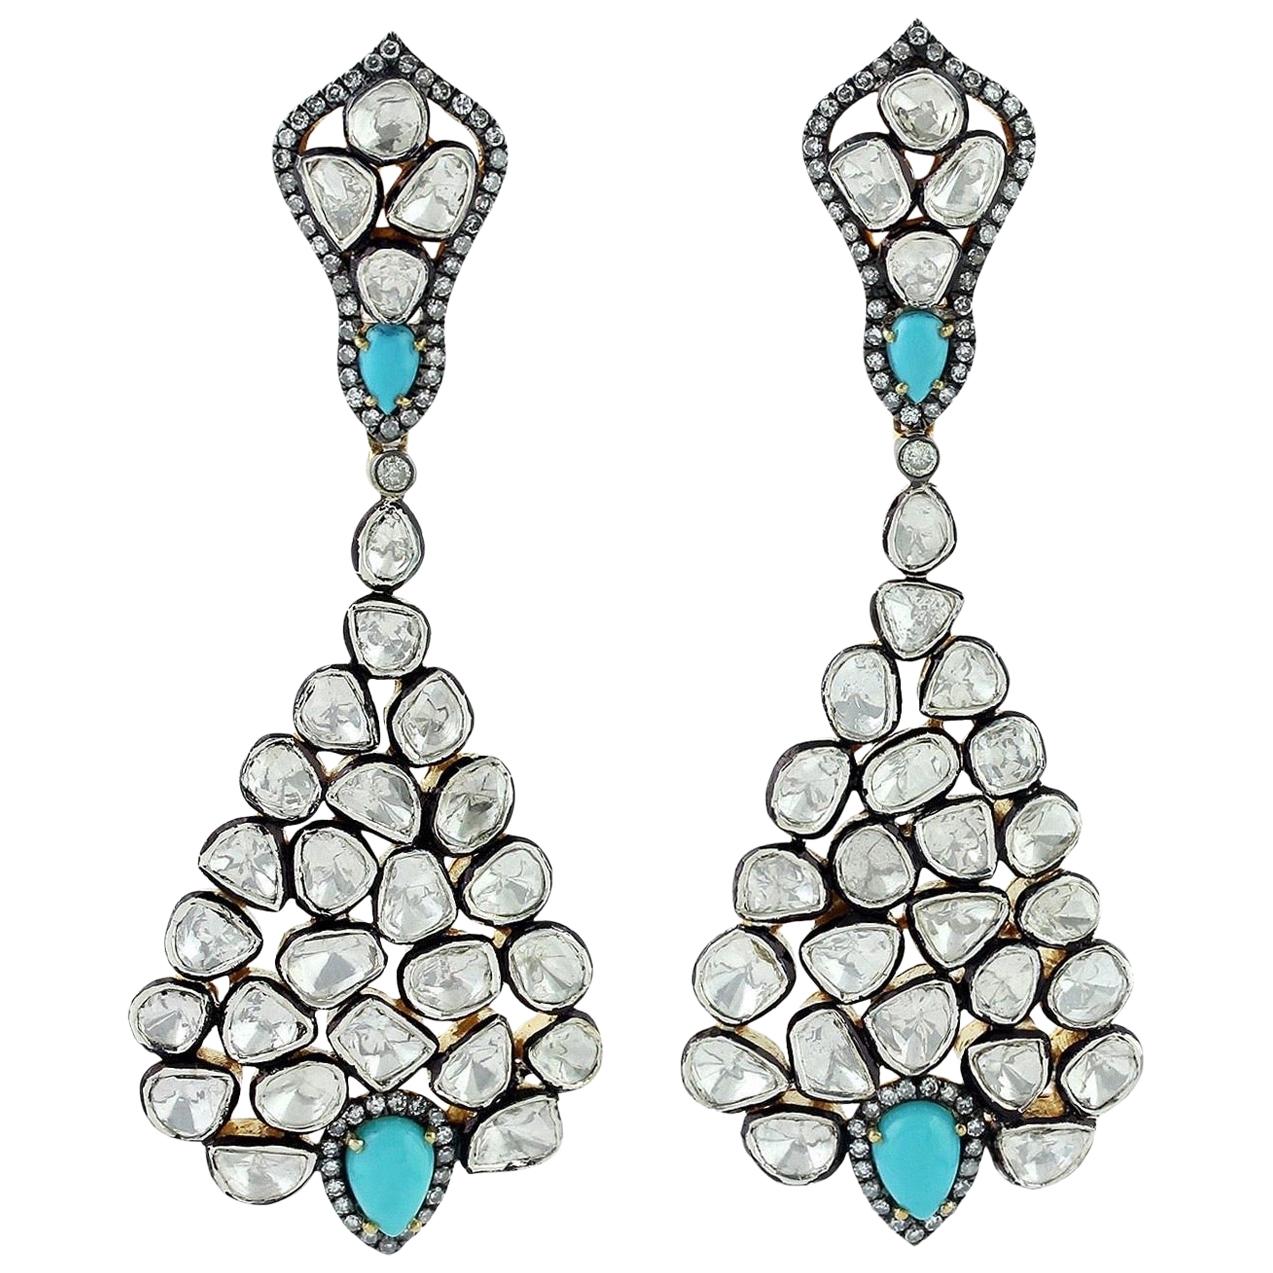 Antique Style Turquoise Rose Cut Diamond Earrings